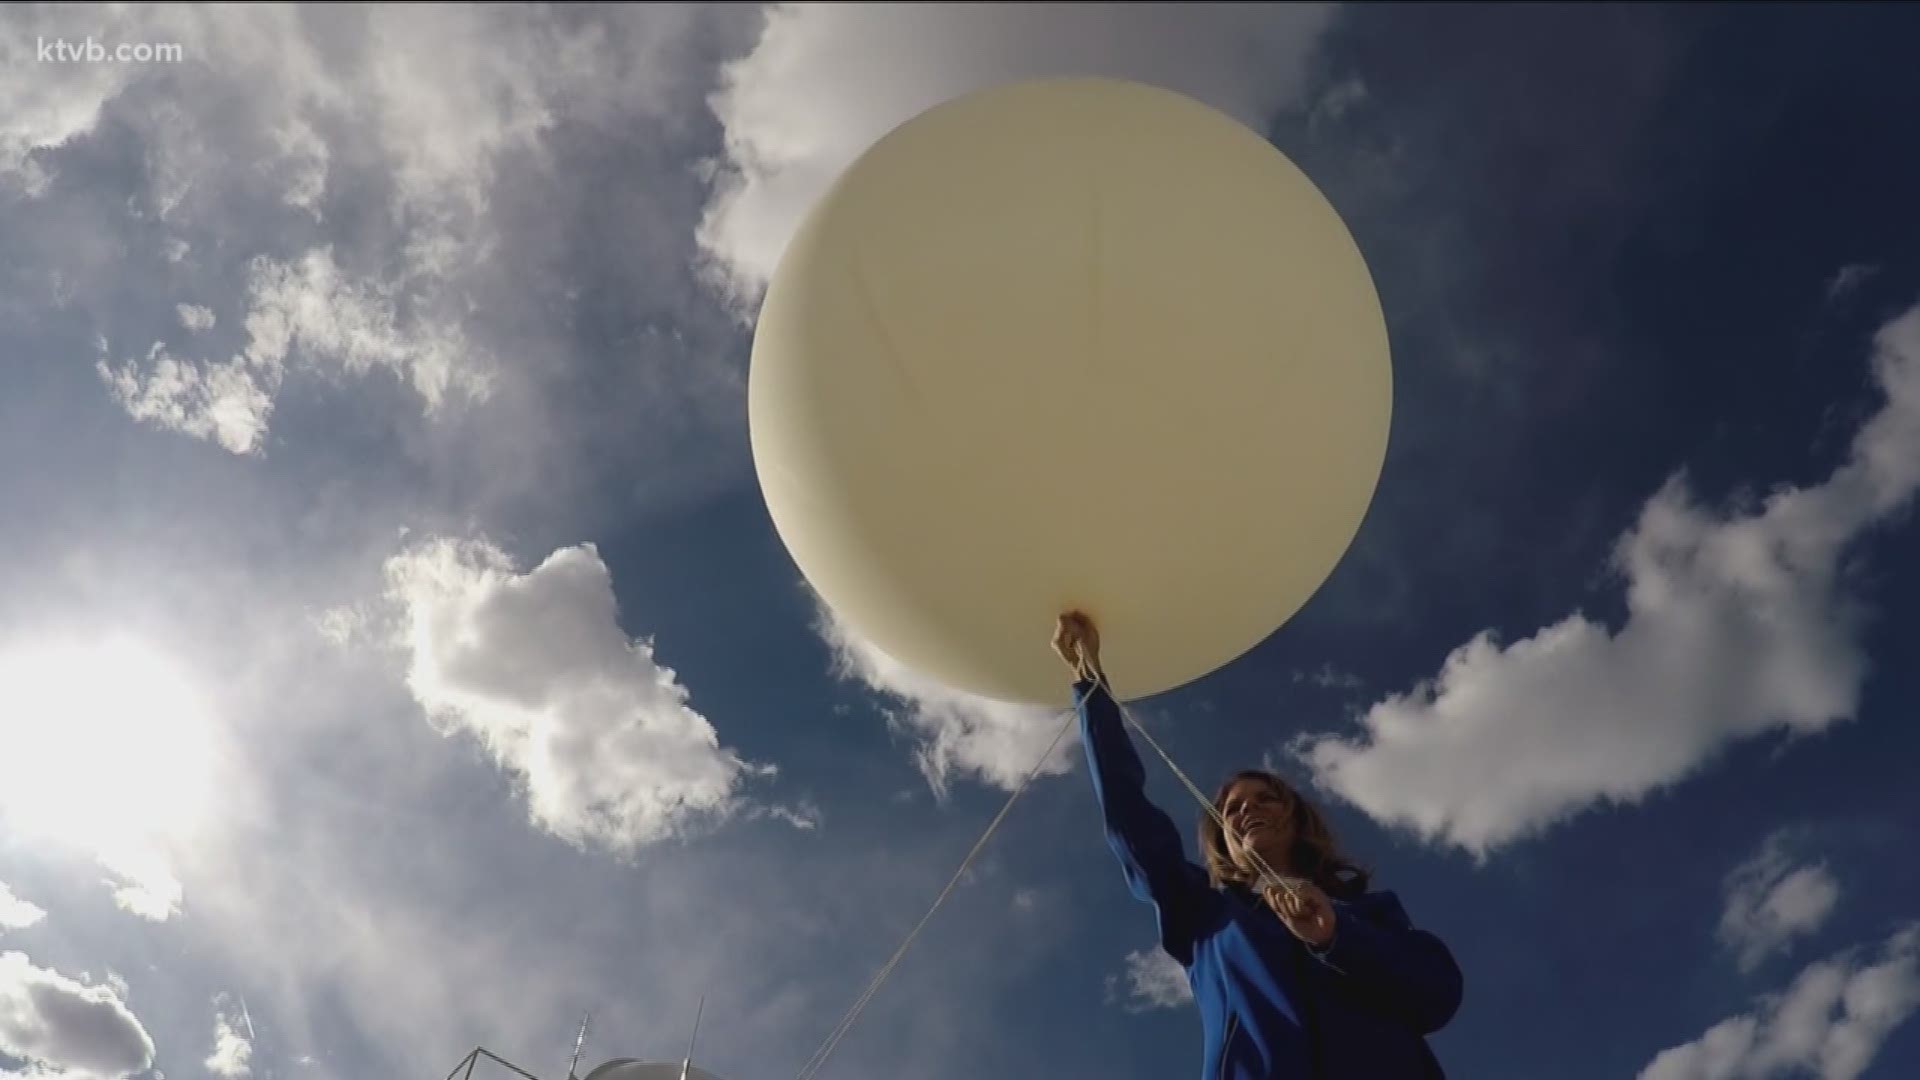 After decades of high-tech changes, the weather balloon endures as an important piece of forecasting equipment at the National Weather Service in Boise.